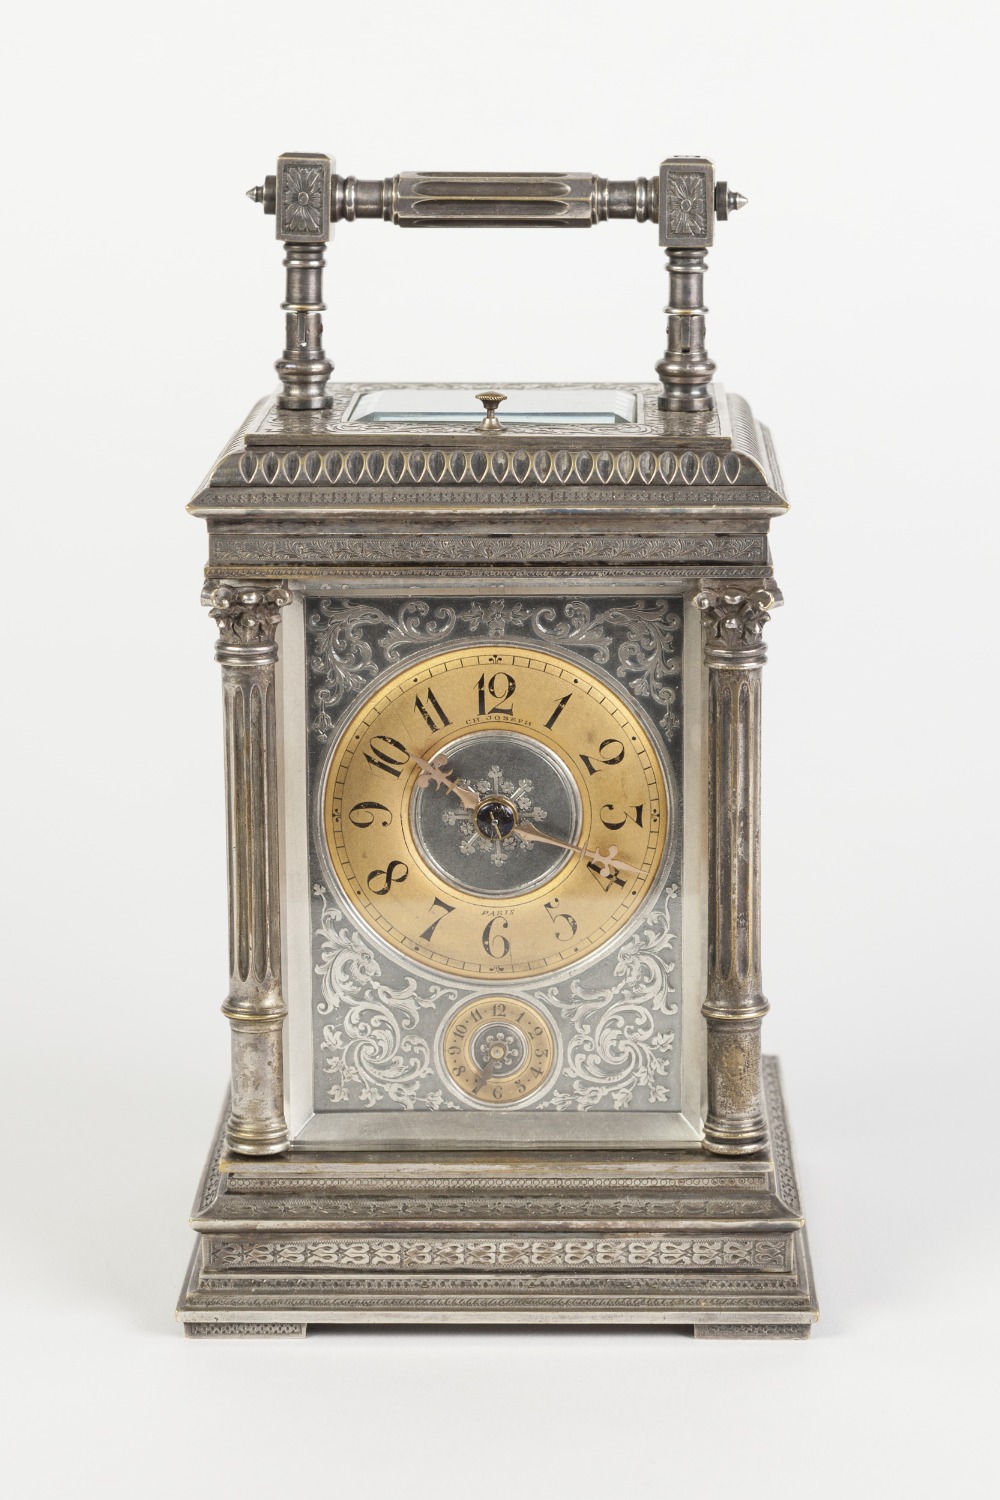 CHARLES H JOSEPH, PARIS (1852 - 1935) PETITE SONNERIE CARRIAGE CLOCK striking on two gongs, with - Image 3 of 5